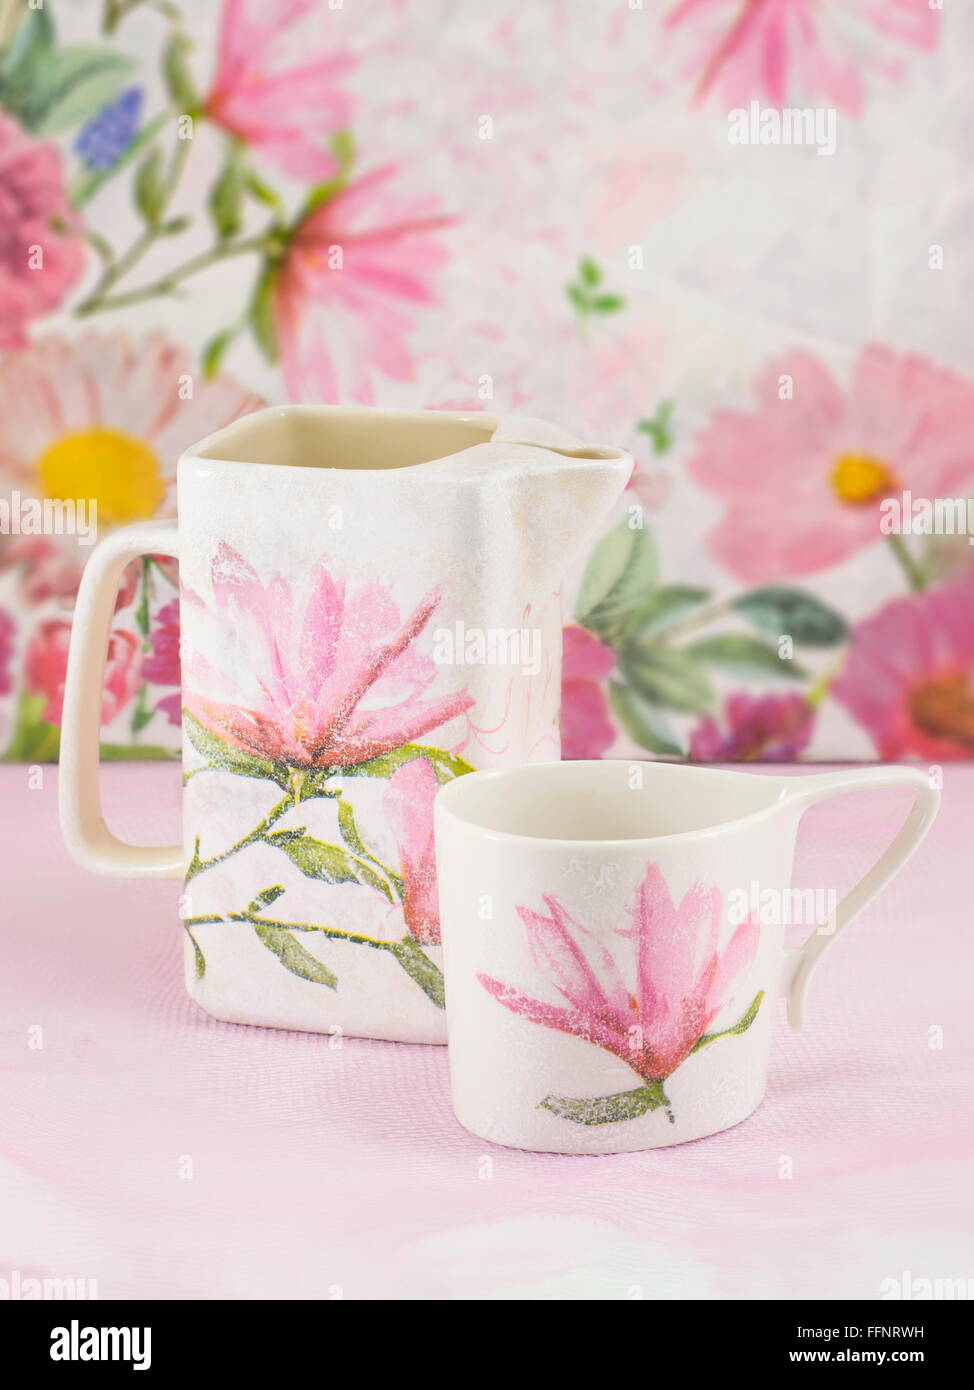 Decoupage decorated tea pot and tea cup against decoupage decorated background Stock Photo